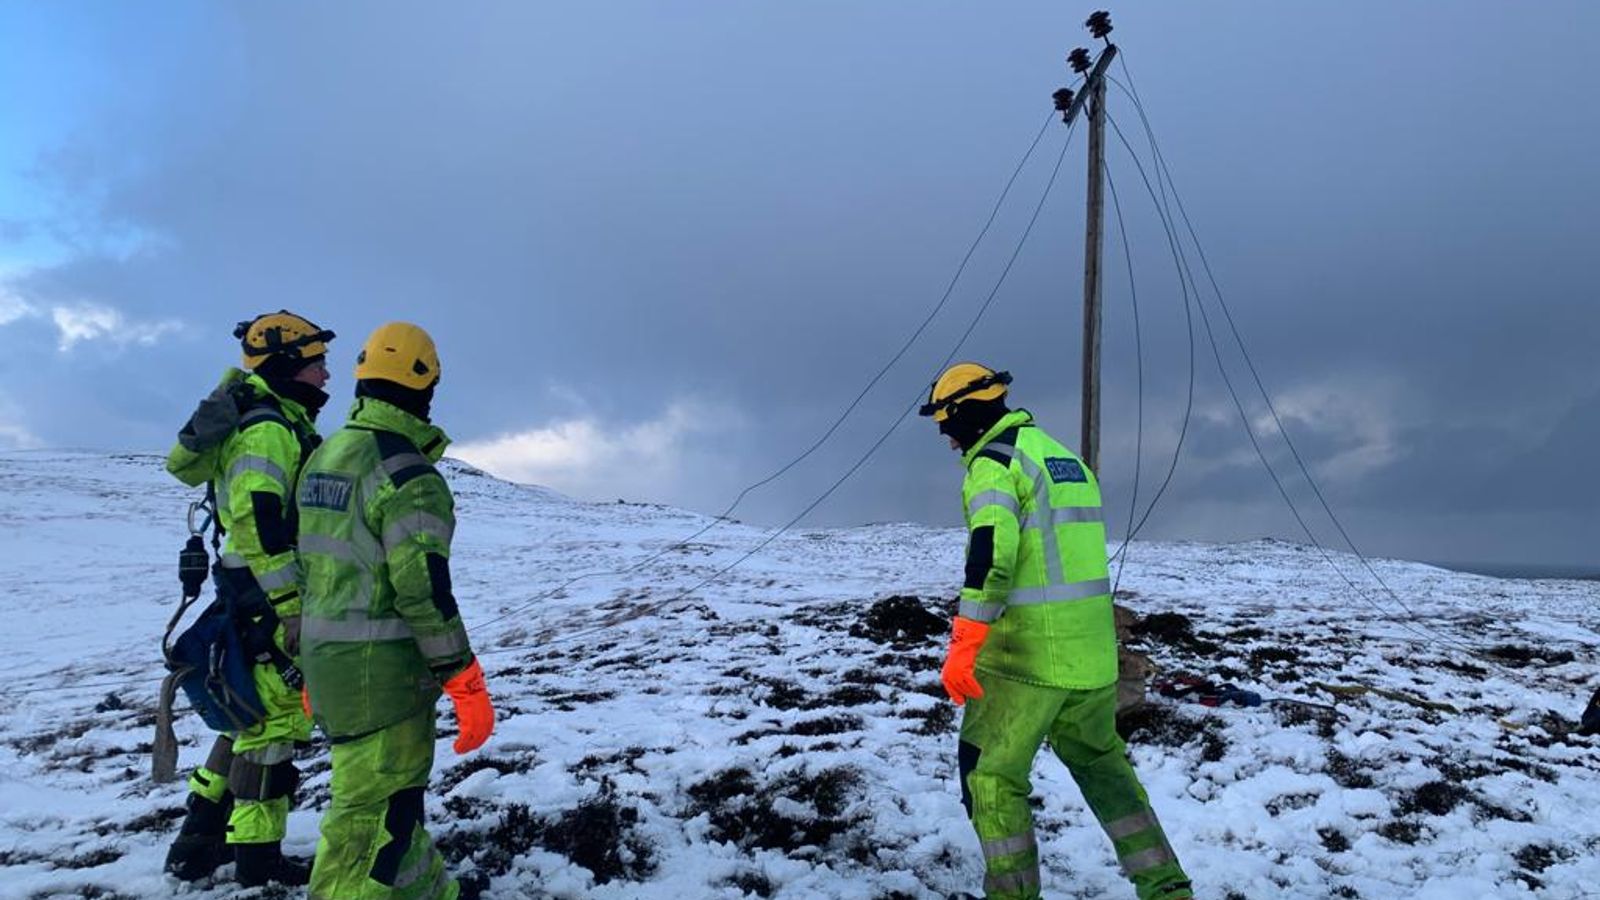 UK weather: Thousands face fourth day without power in icy Shetland - with warnings disruption could last into weekend